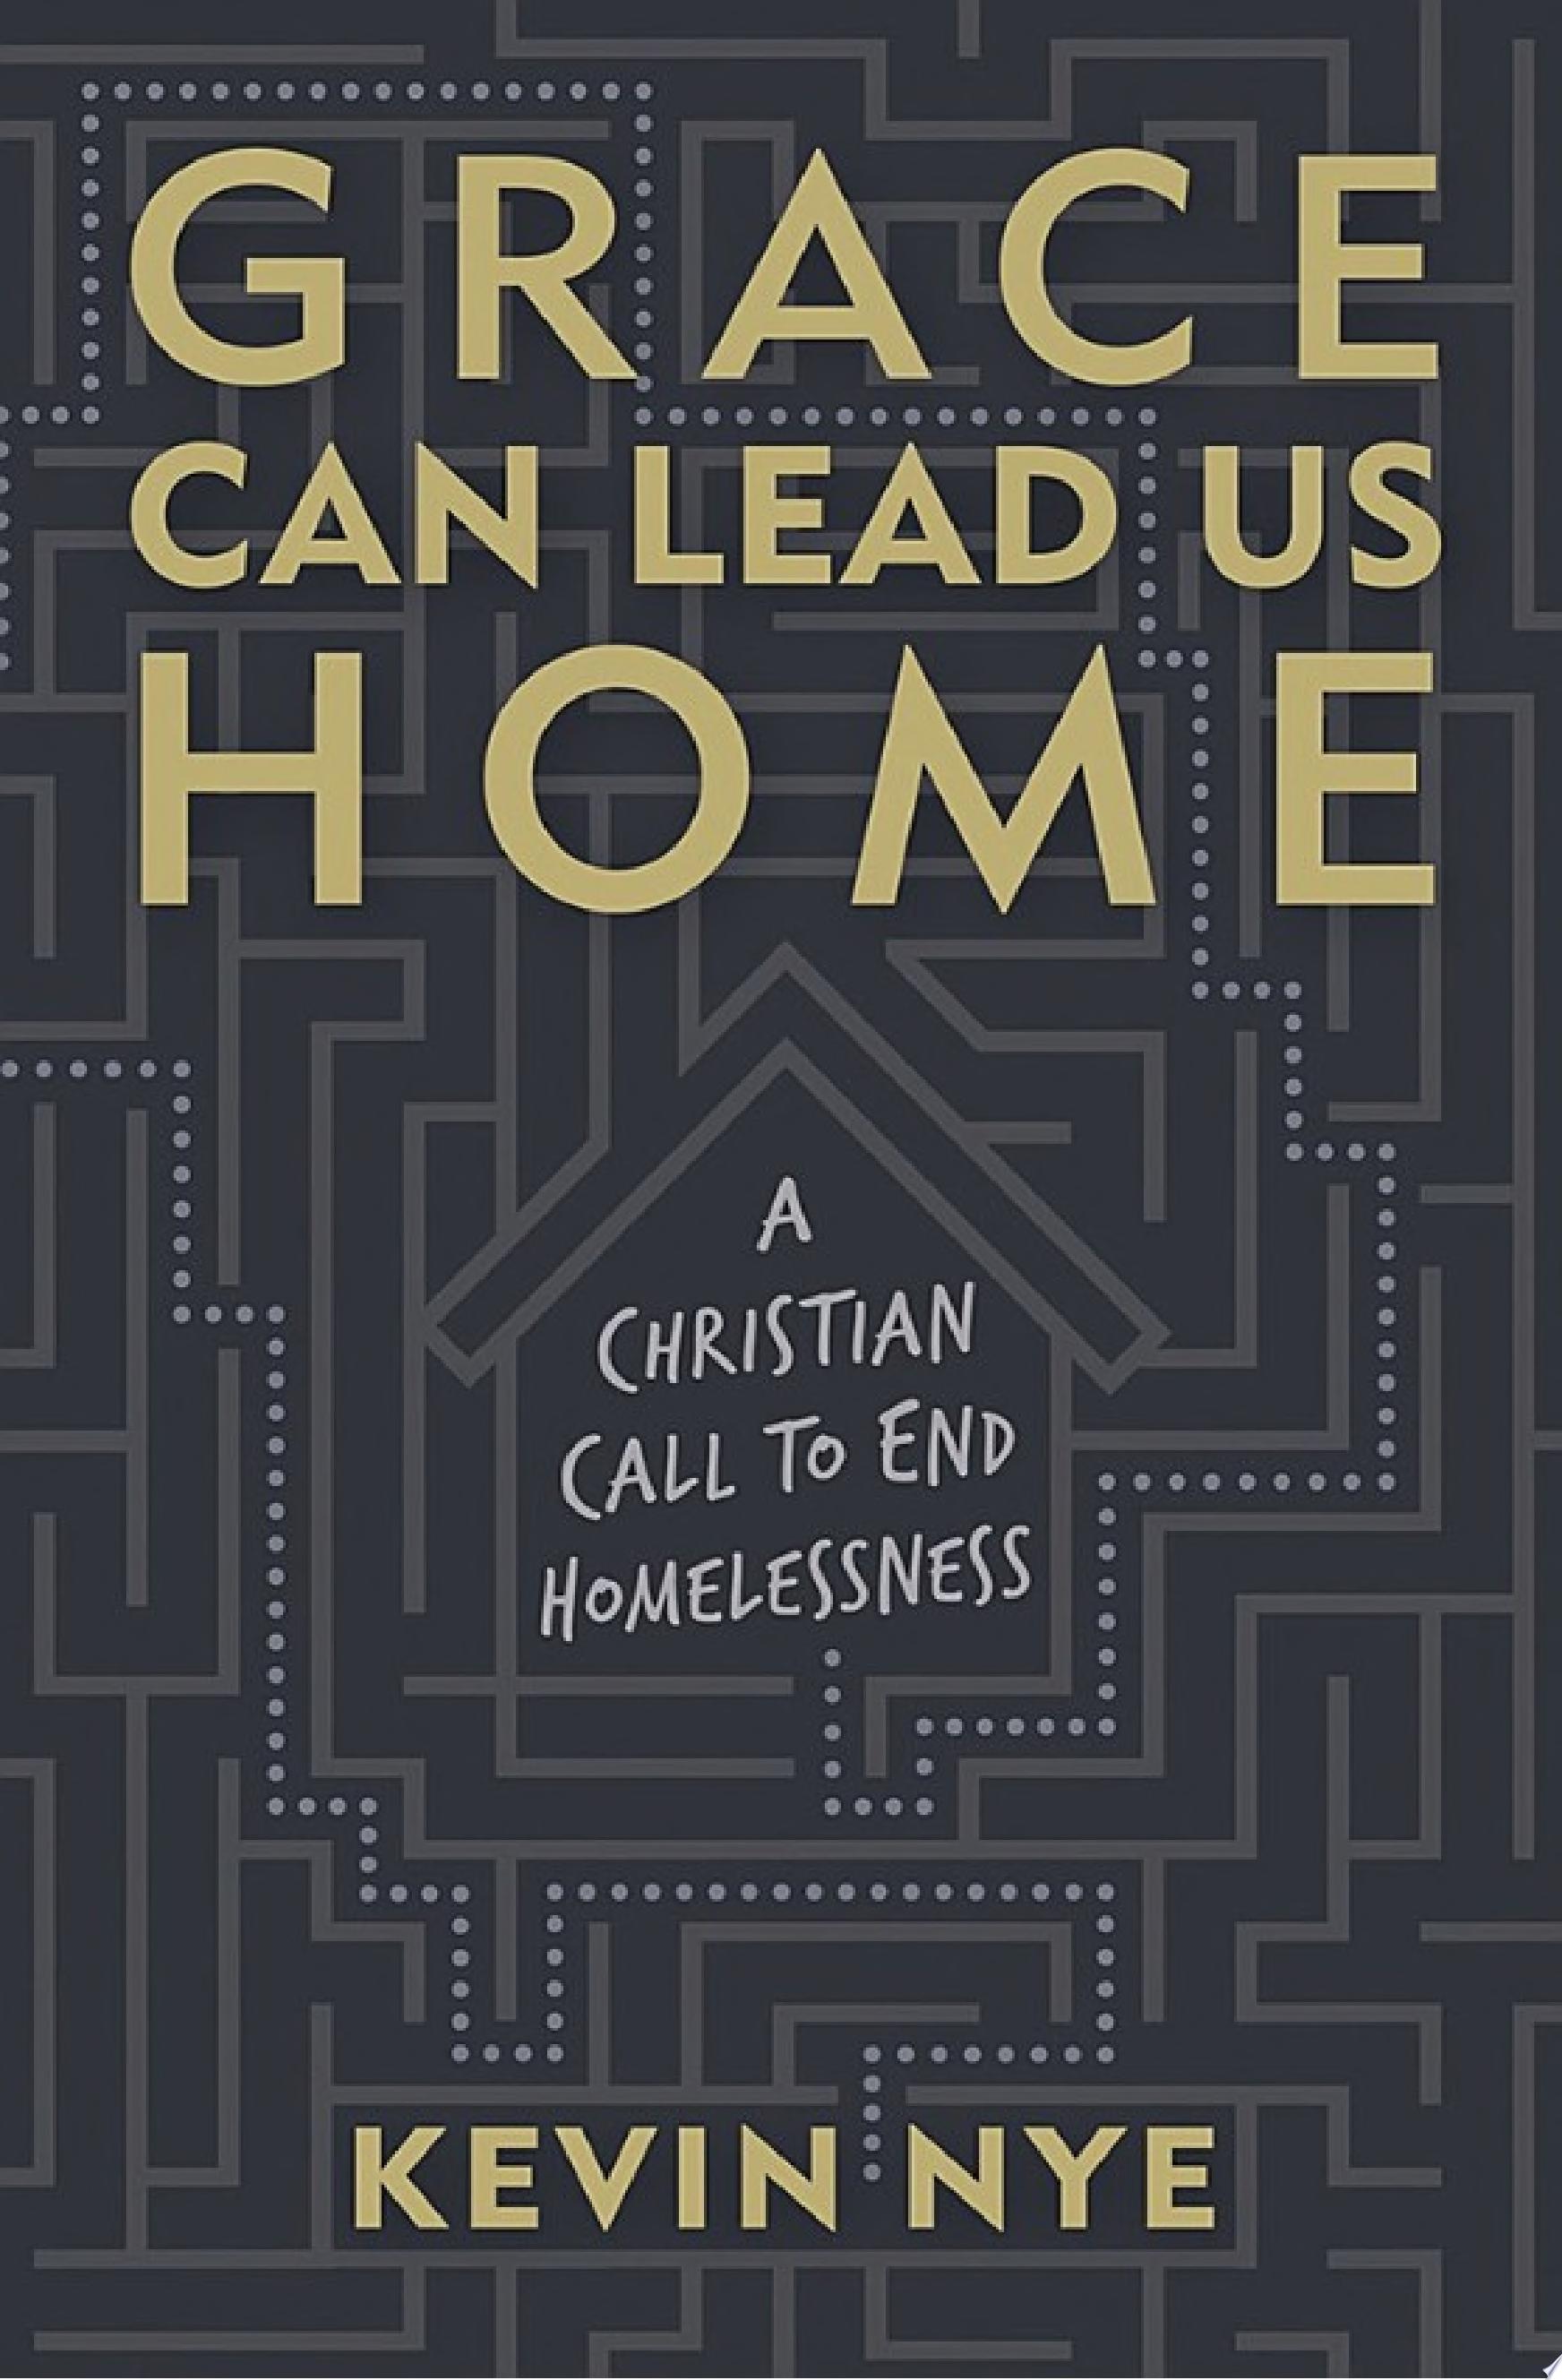 Image for "Grace Can Lead Us Home"